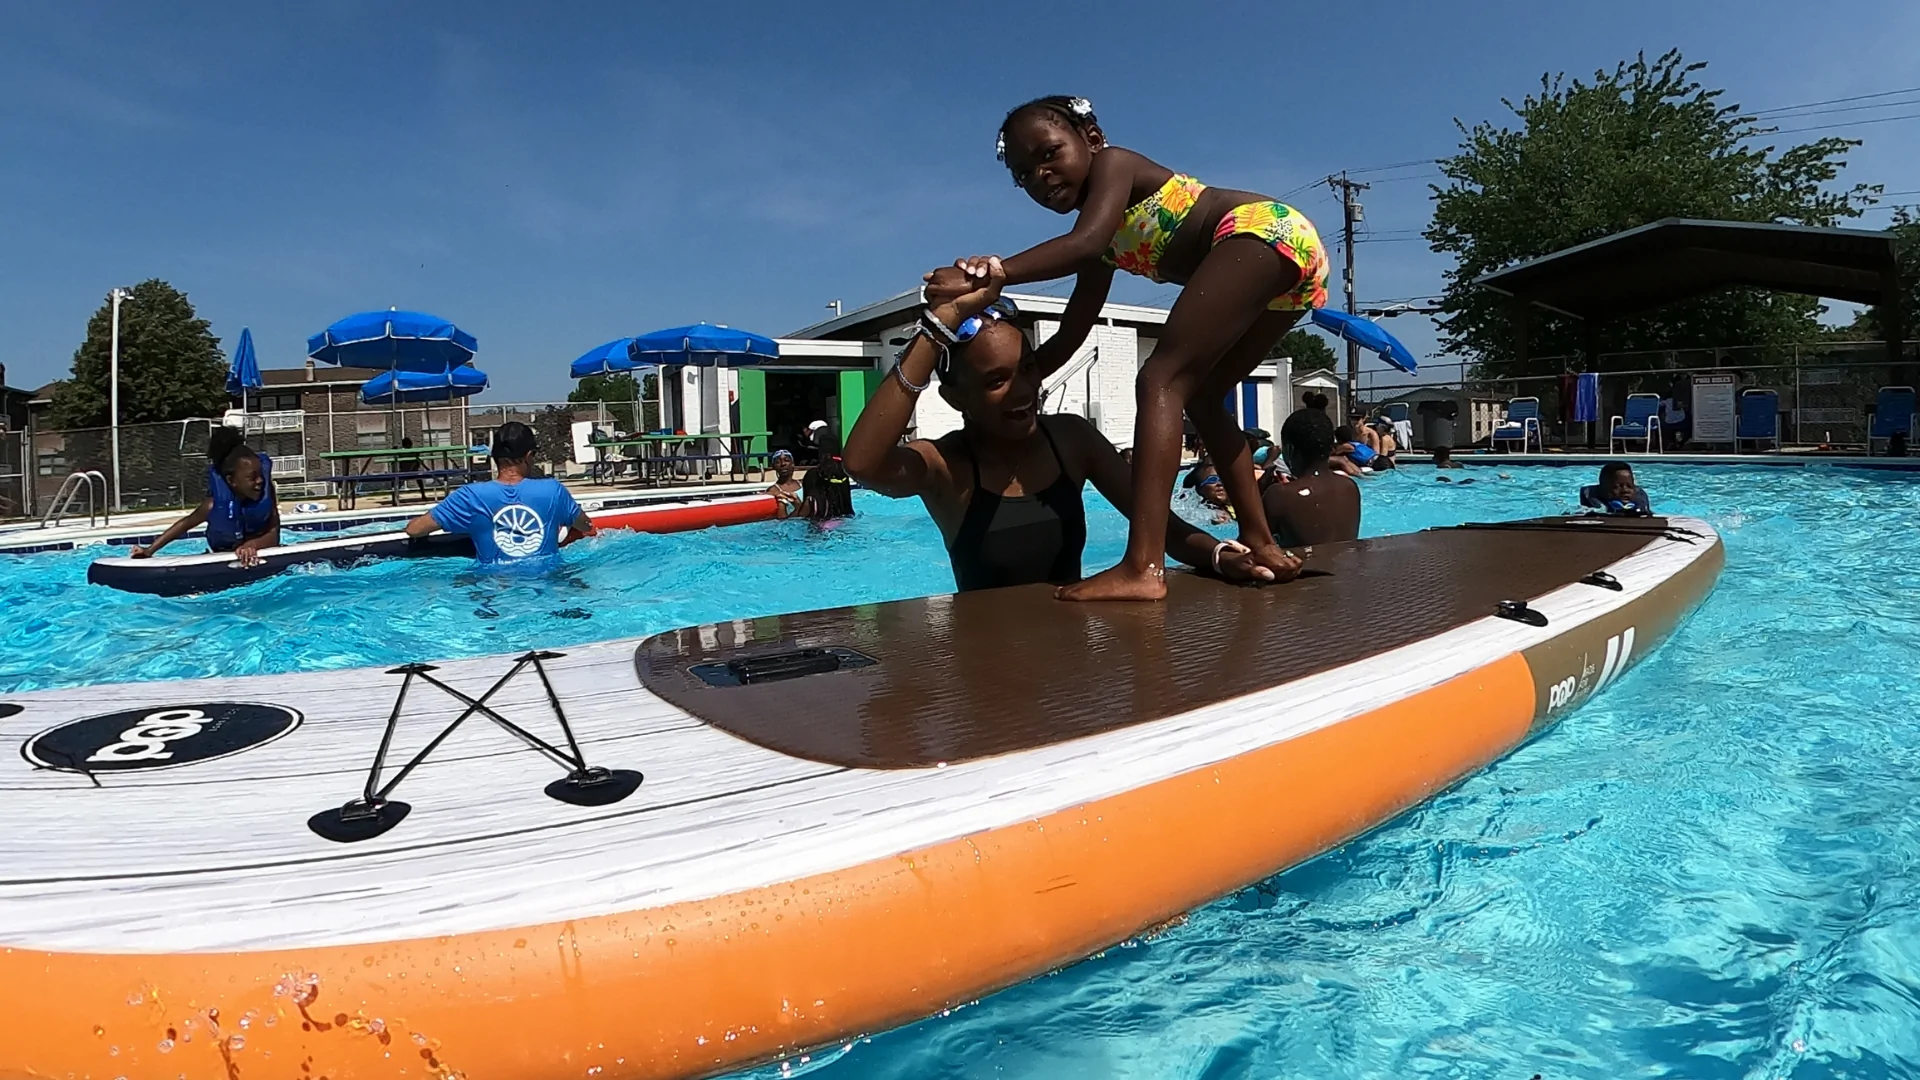 A girl stands with assistance on an inflatable paddleboard in a pool